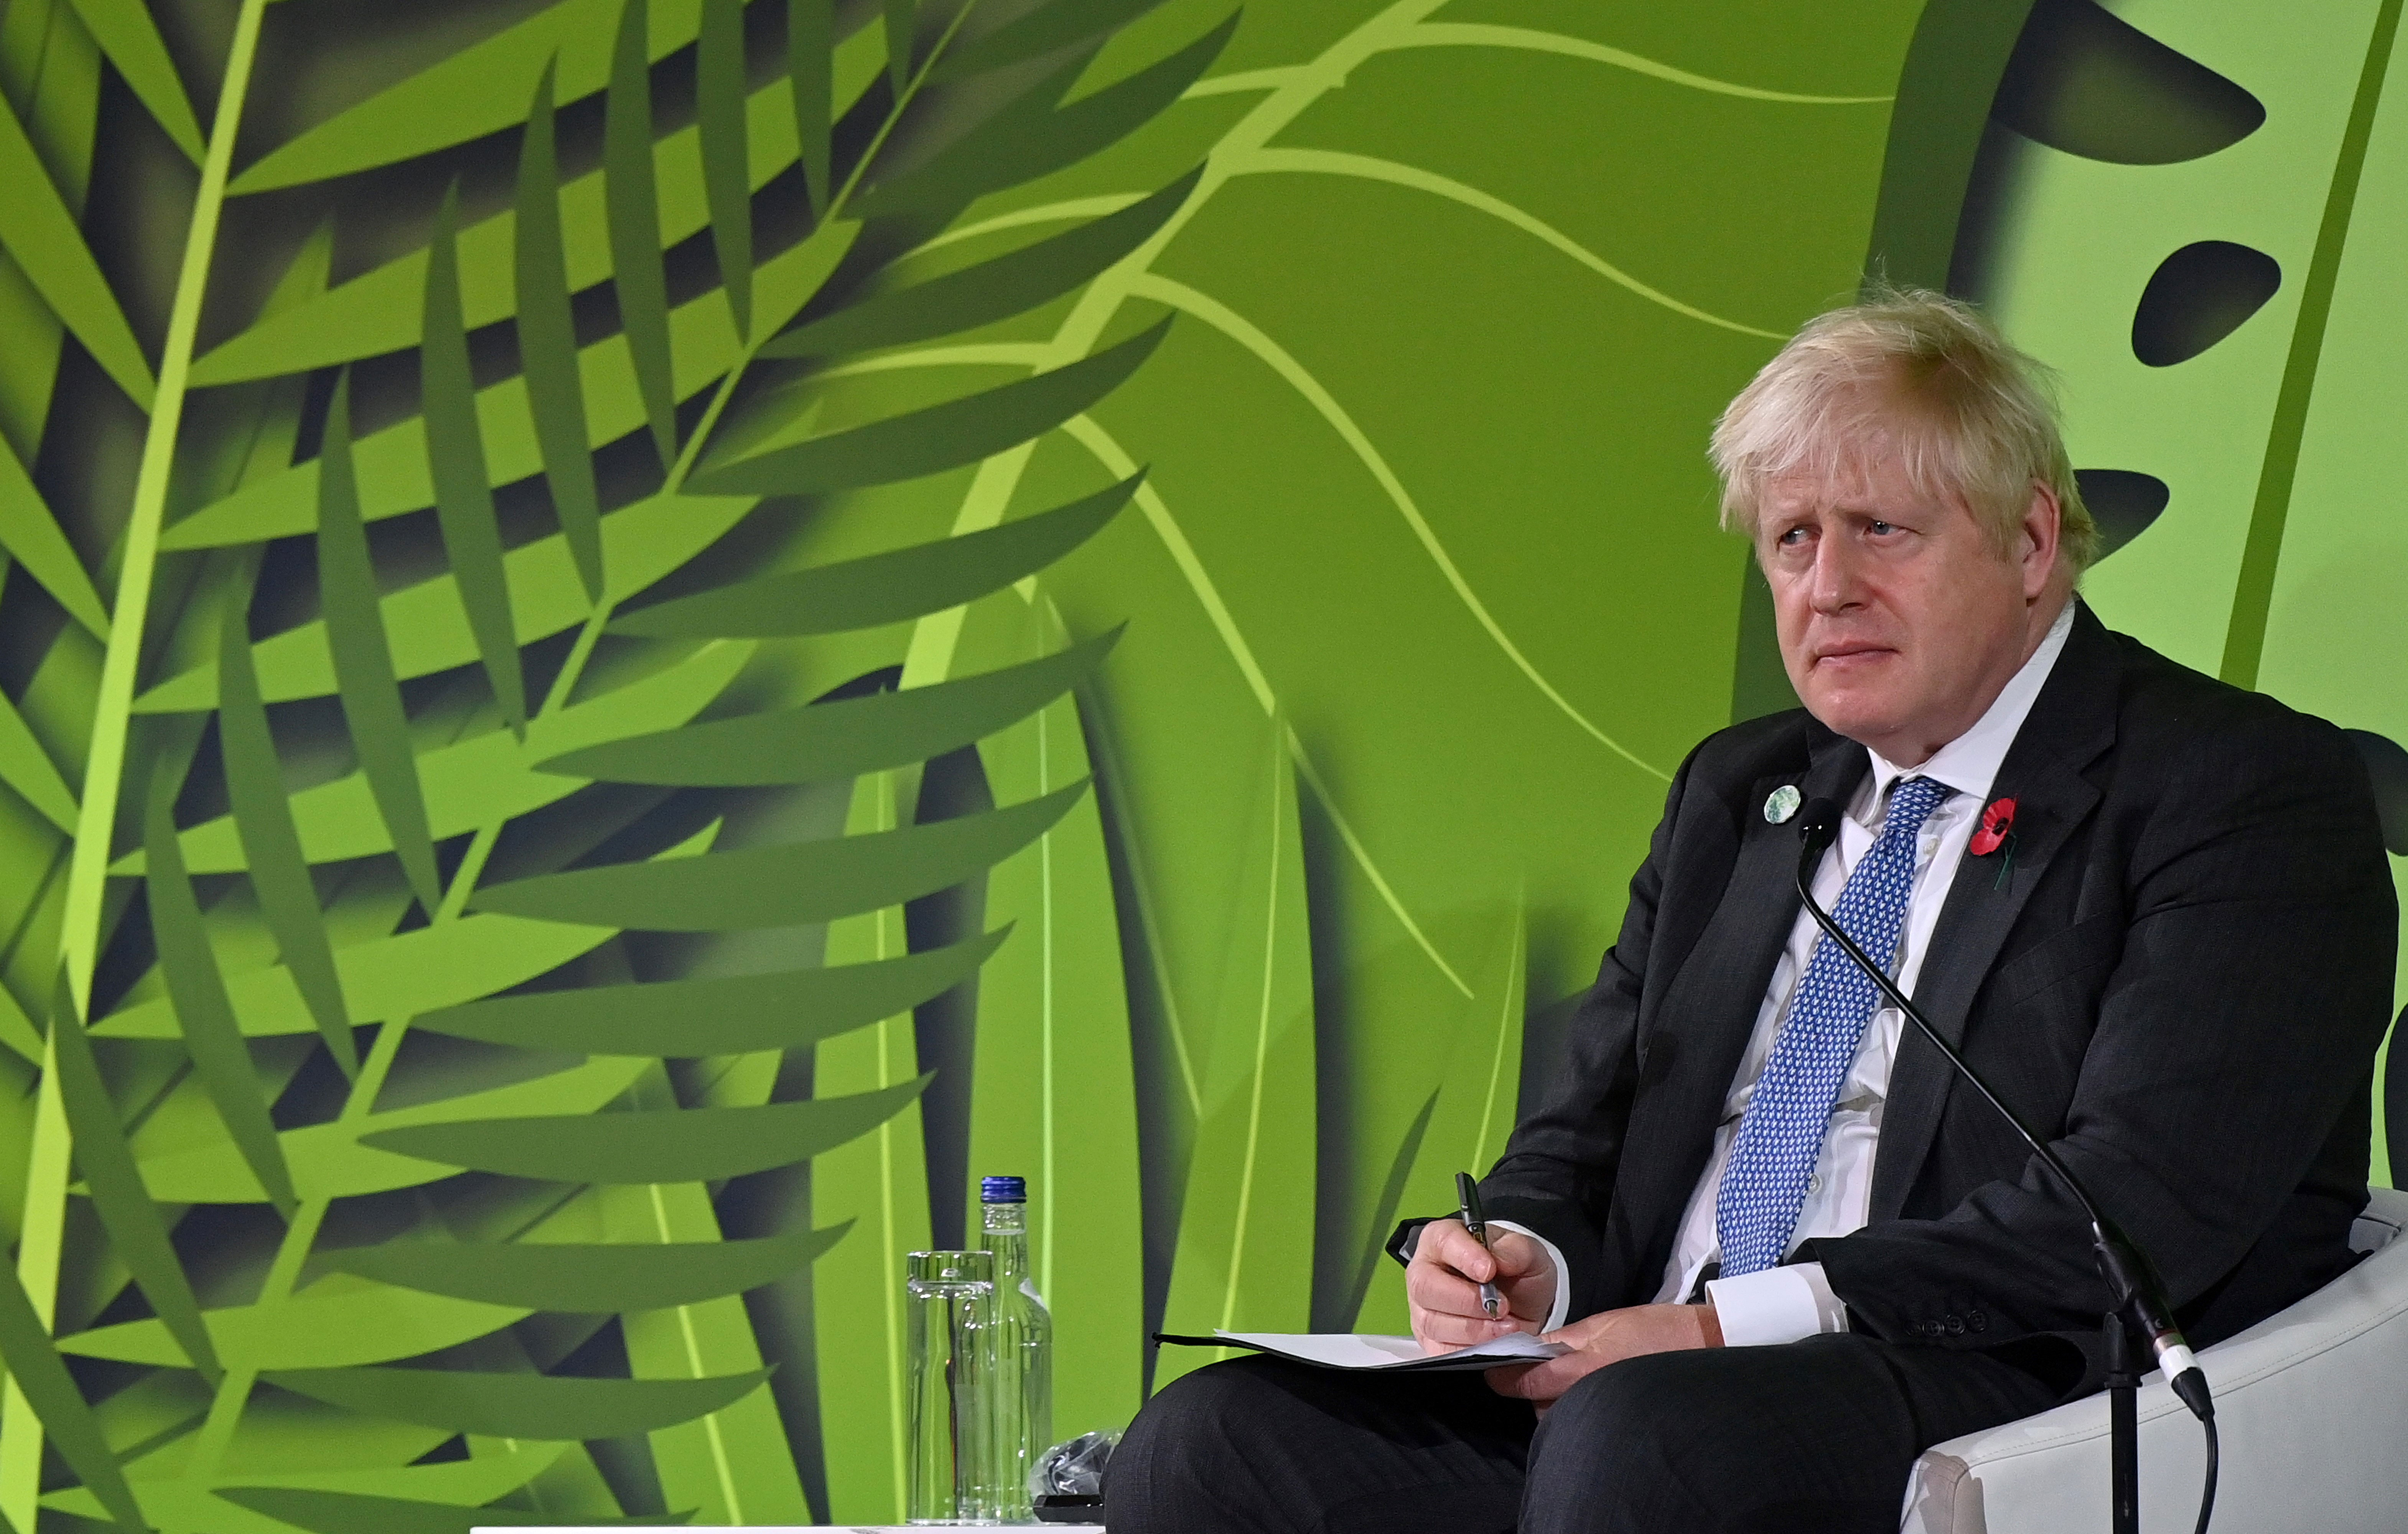 British Prime Minister Boris Johnson listens during an event at COP26 in Glasgow, Scotland, on November 2.